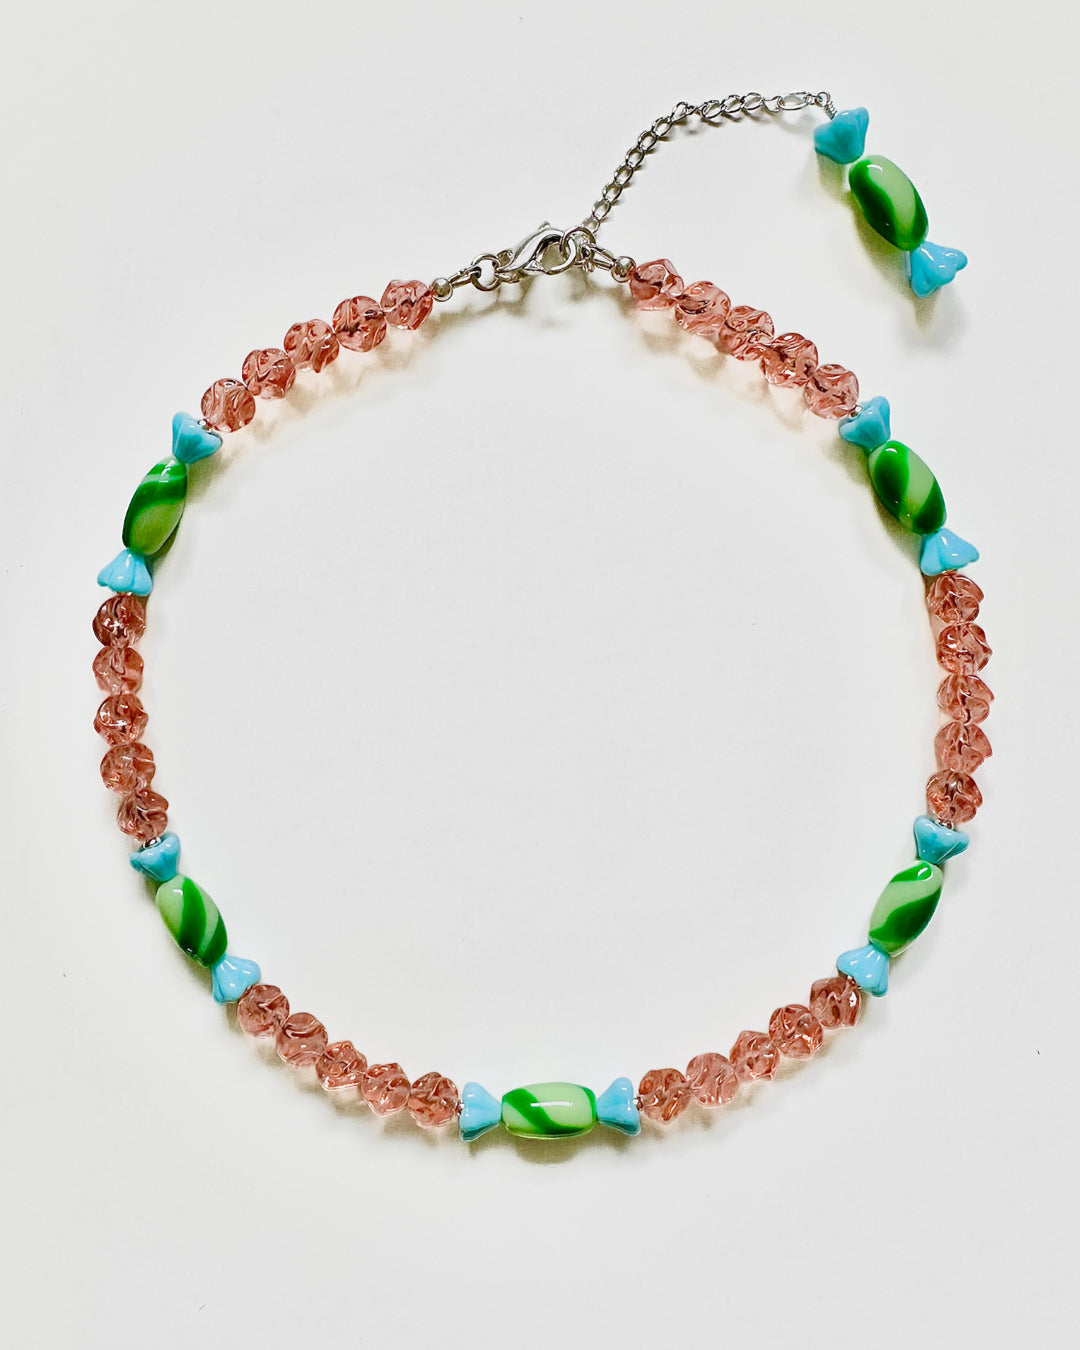 🍉🍬 Watermelon Candy Necklace 🍬🍉